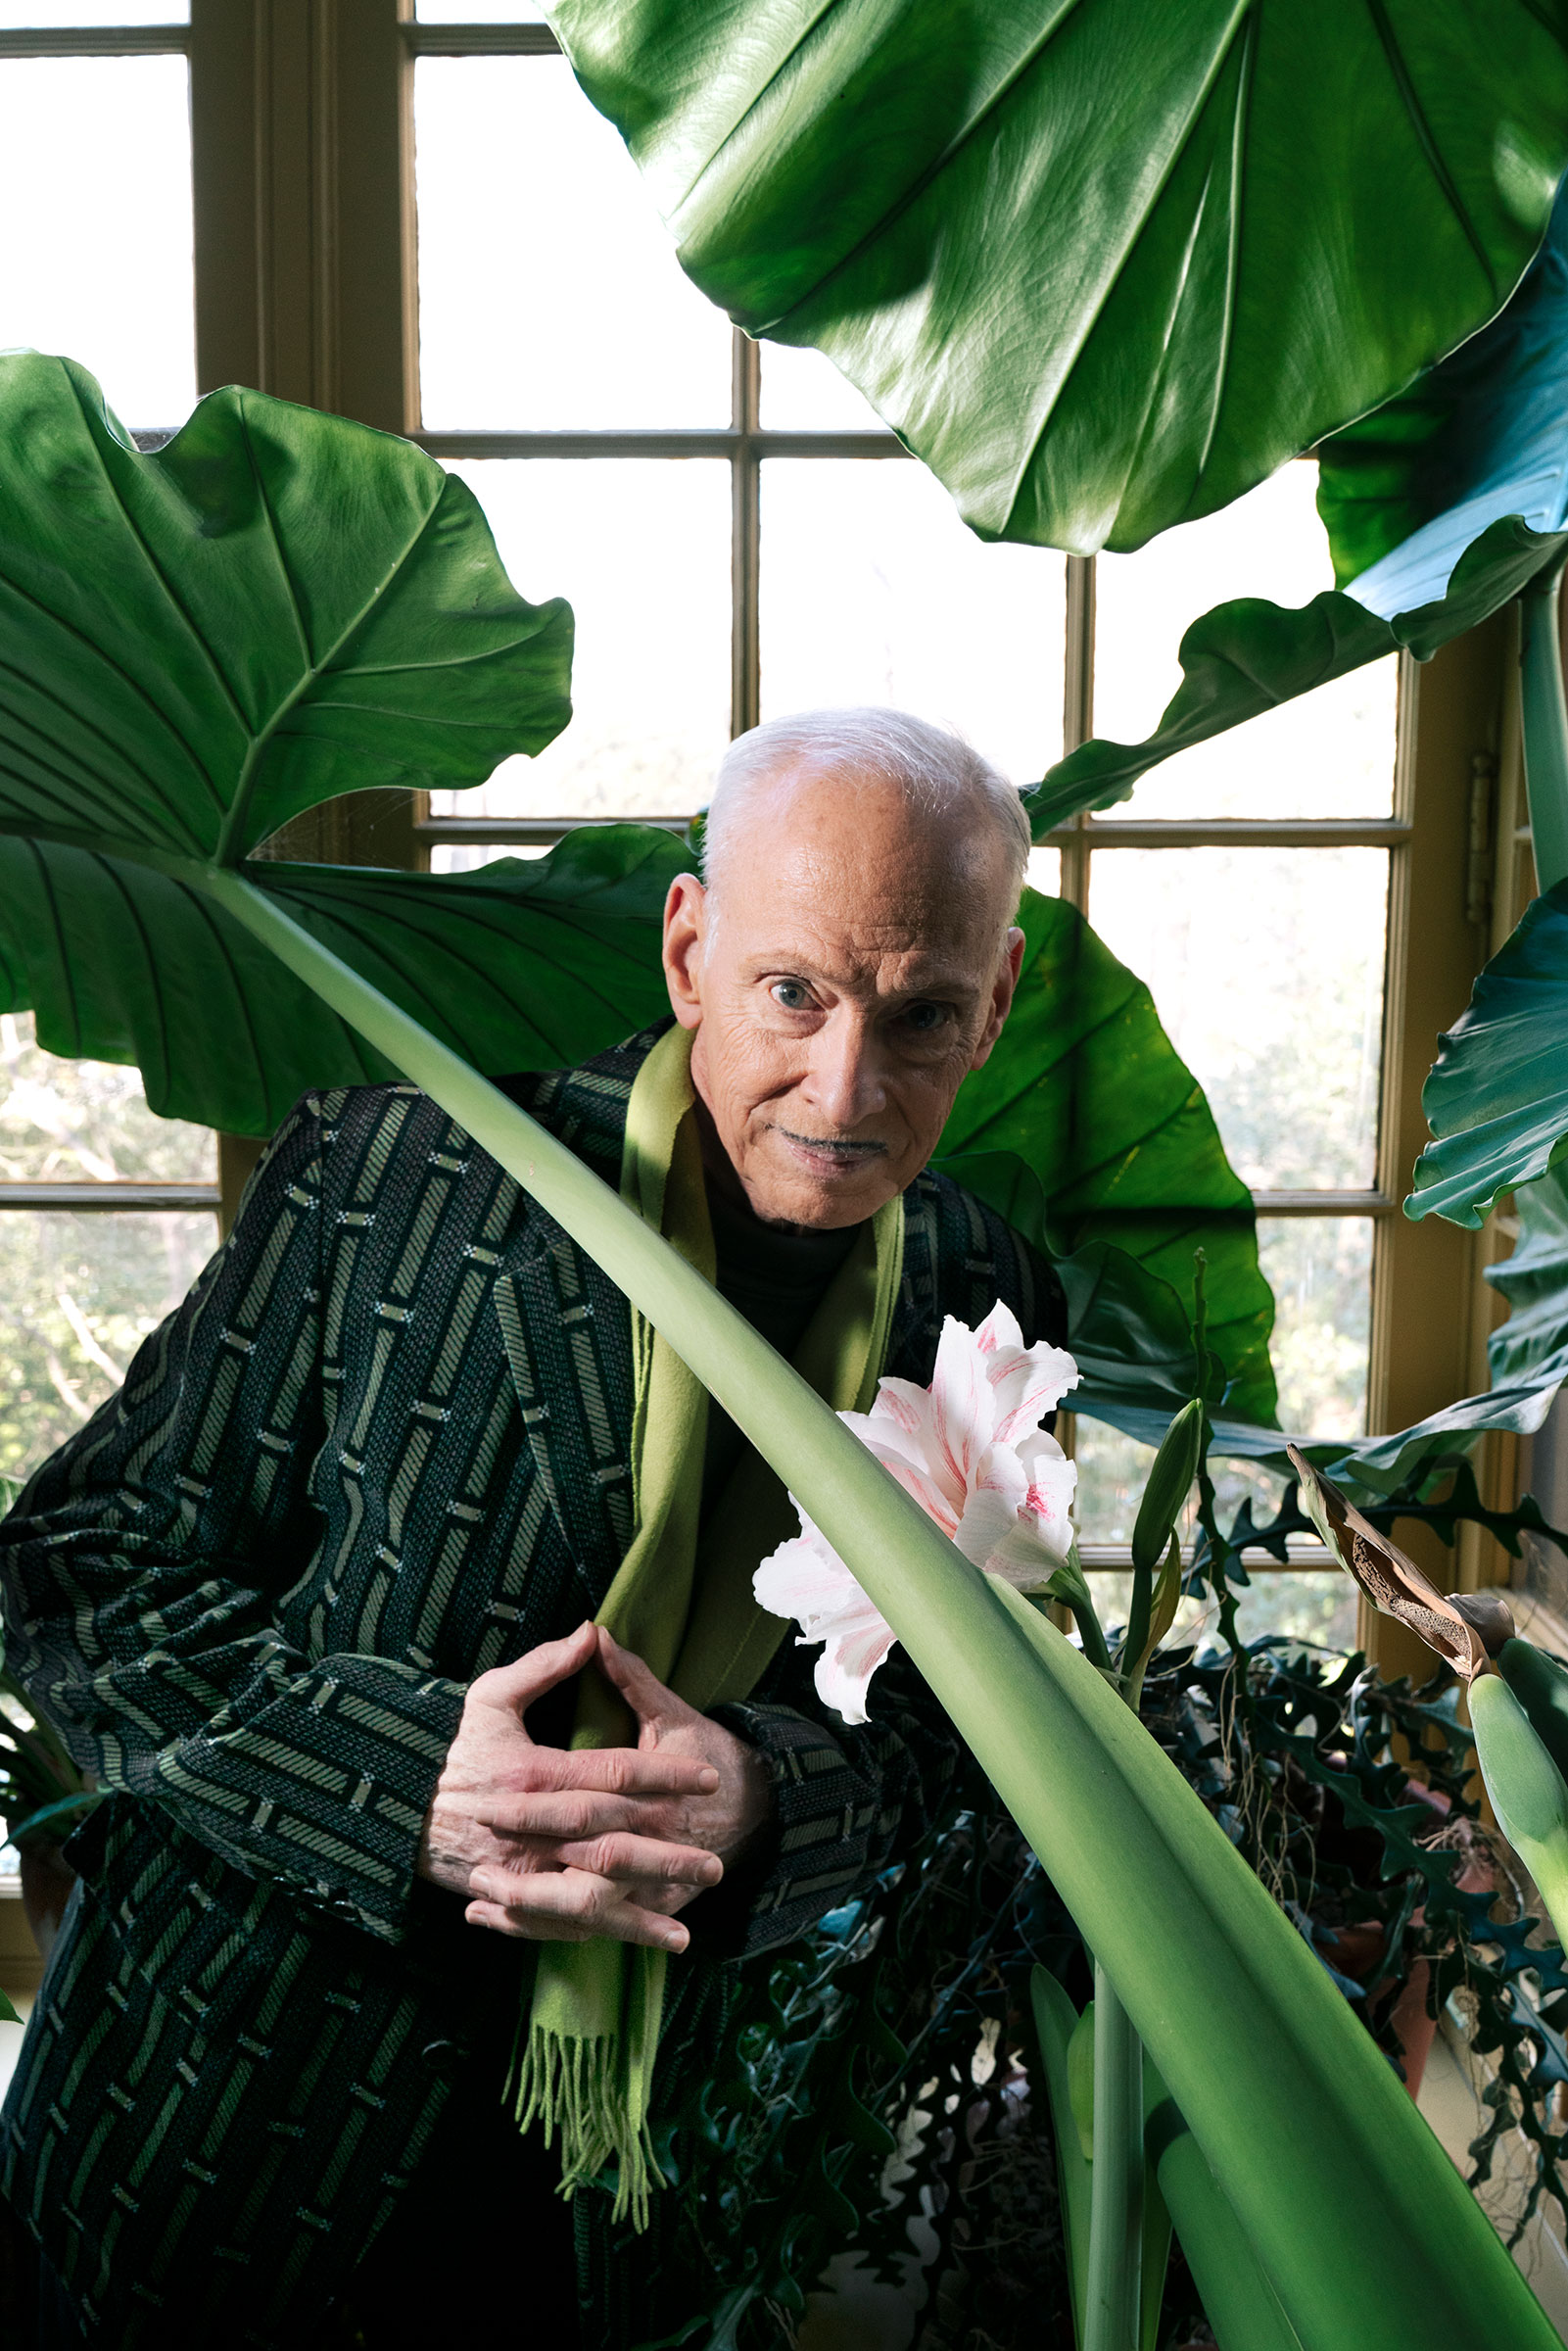 BALTIMORE, MD - FEBRUARY 14, 2022: Portrait of director and writer, John Waters, in his Baltimore home. CREDIT: Peter Fisher for TIME